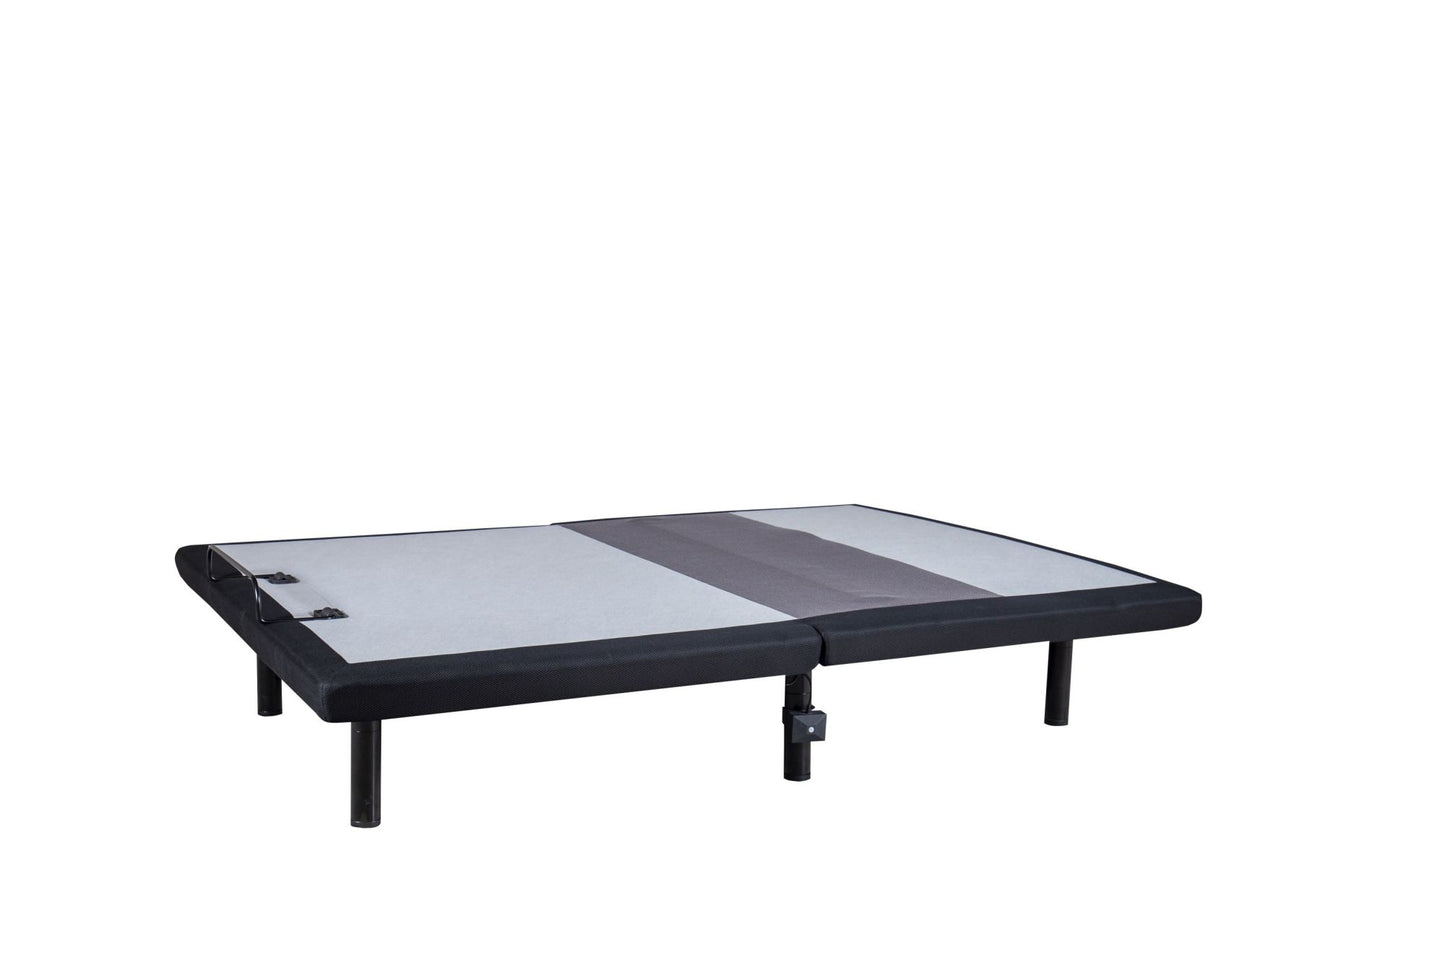 Softform Adjustable Bed Base - Customizable Comfort and Relaxation - Independent Head and Foot Incline - Wireless Remote or App Control